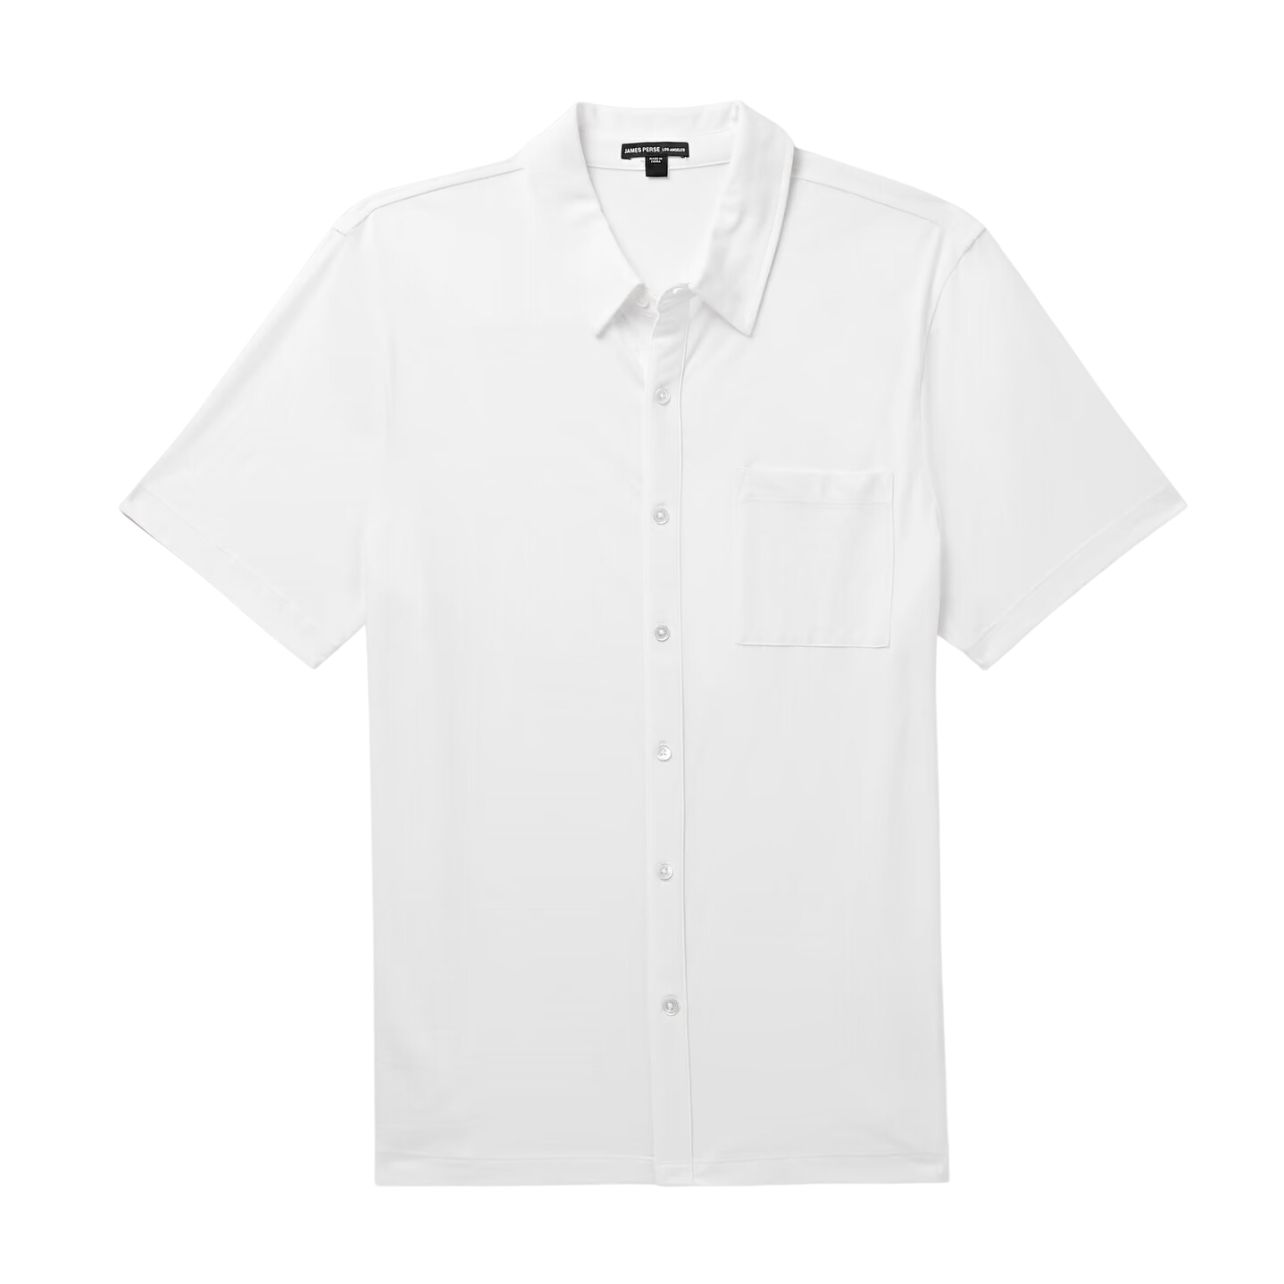 High-quality basics with an edge. James Perse might be best known for their comfortably chic sweats, but the brand can also lend its cool cache to elevated pieces as well. For the White Party consider their double layer short sleeve shirt, complete with buttons, a collar, and material so soft, you’ll think you’re in your favorite broken-in tee.